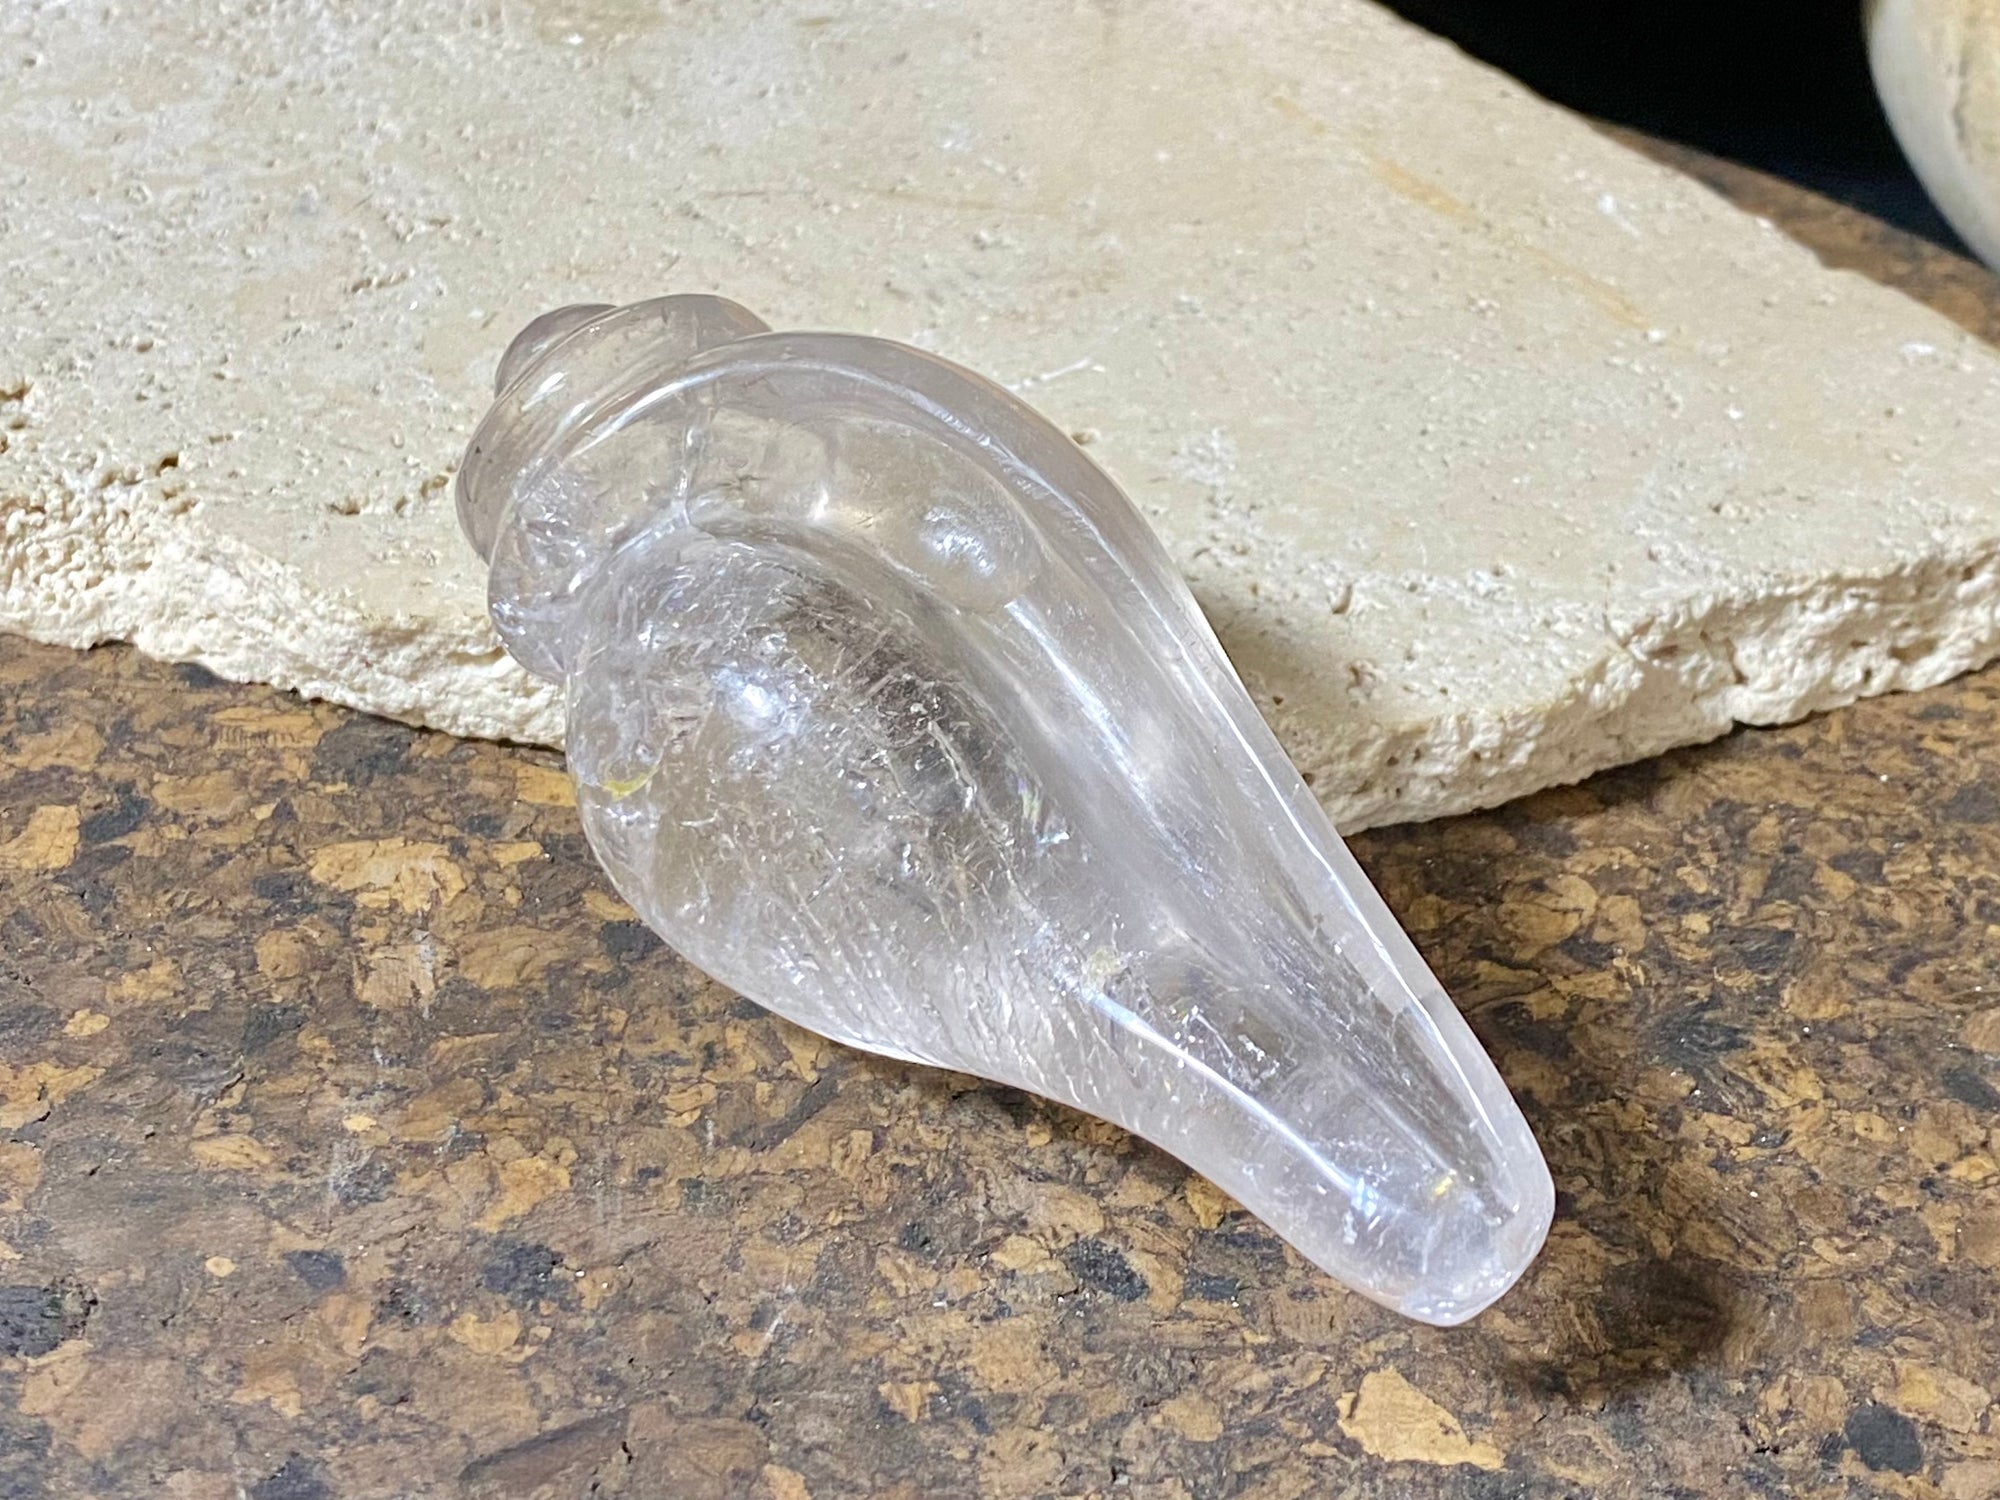 Hand carved conch shell. This vintage piece is carved from a solid piece of Himalayan rock crystal (quartz). The conch shell is sacred to both Hindus and Buddhists. Hand carved in Nepal. Measurements: length 10 cm, width at widest point 4.5 cm